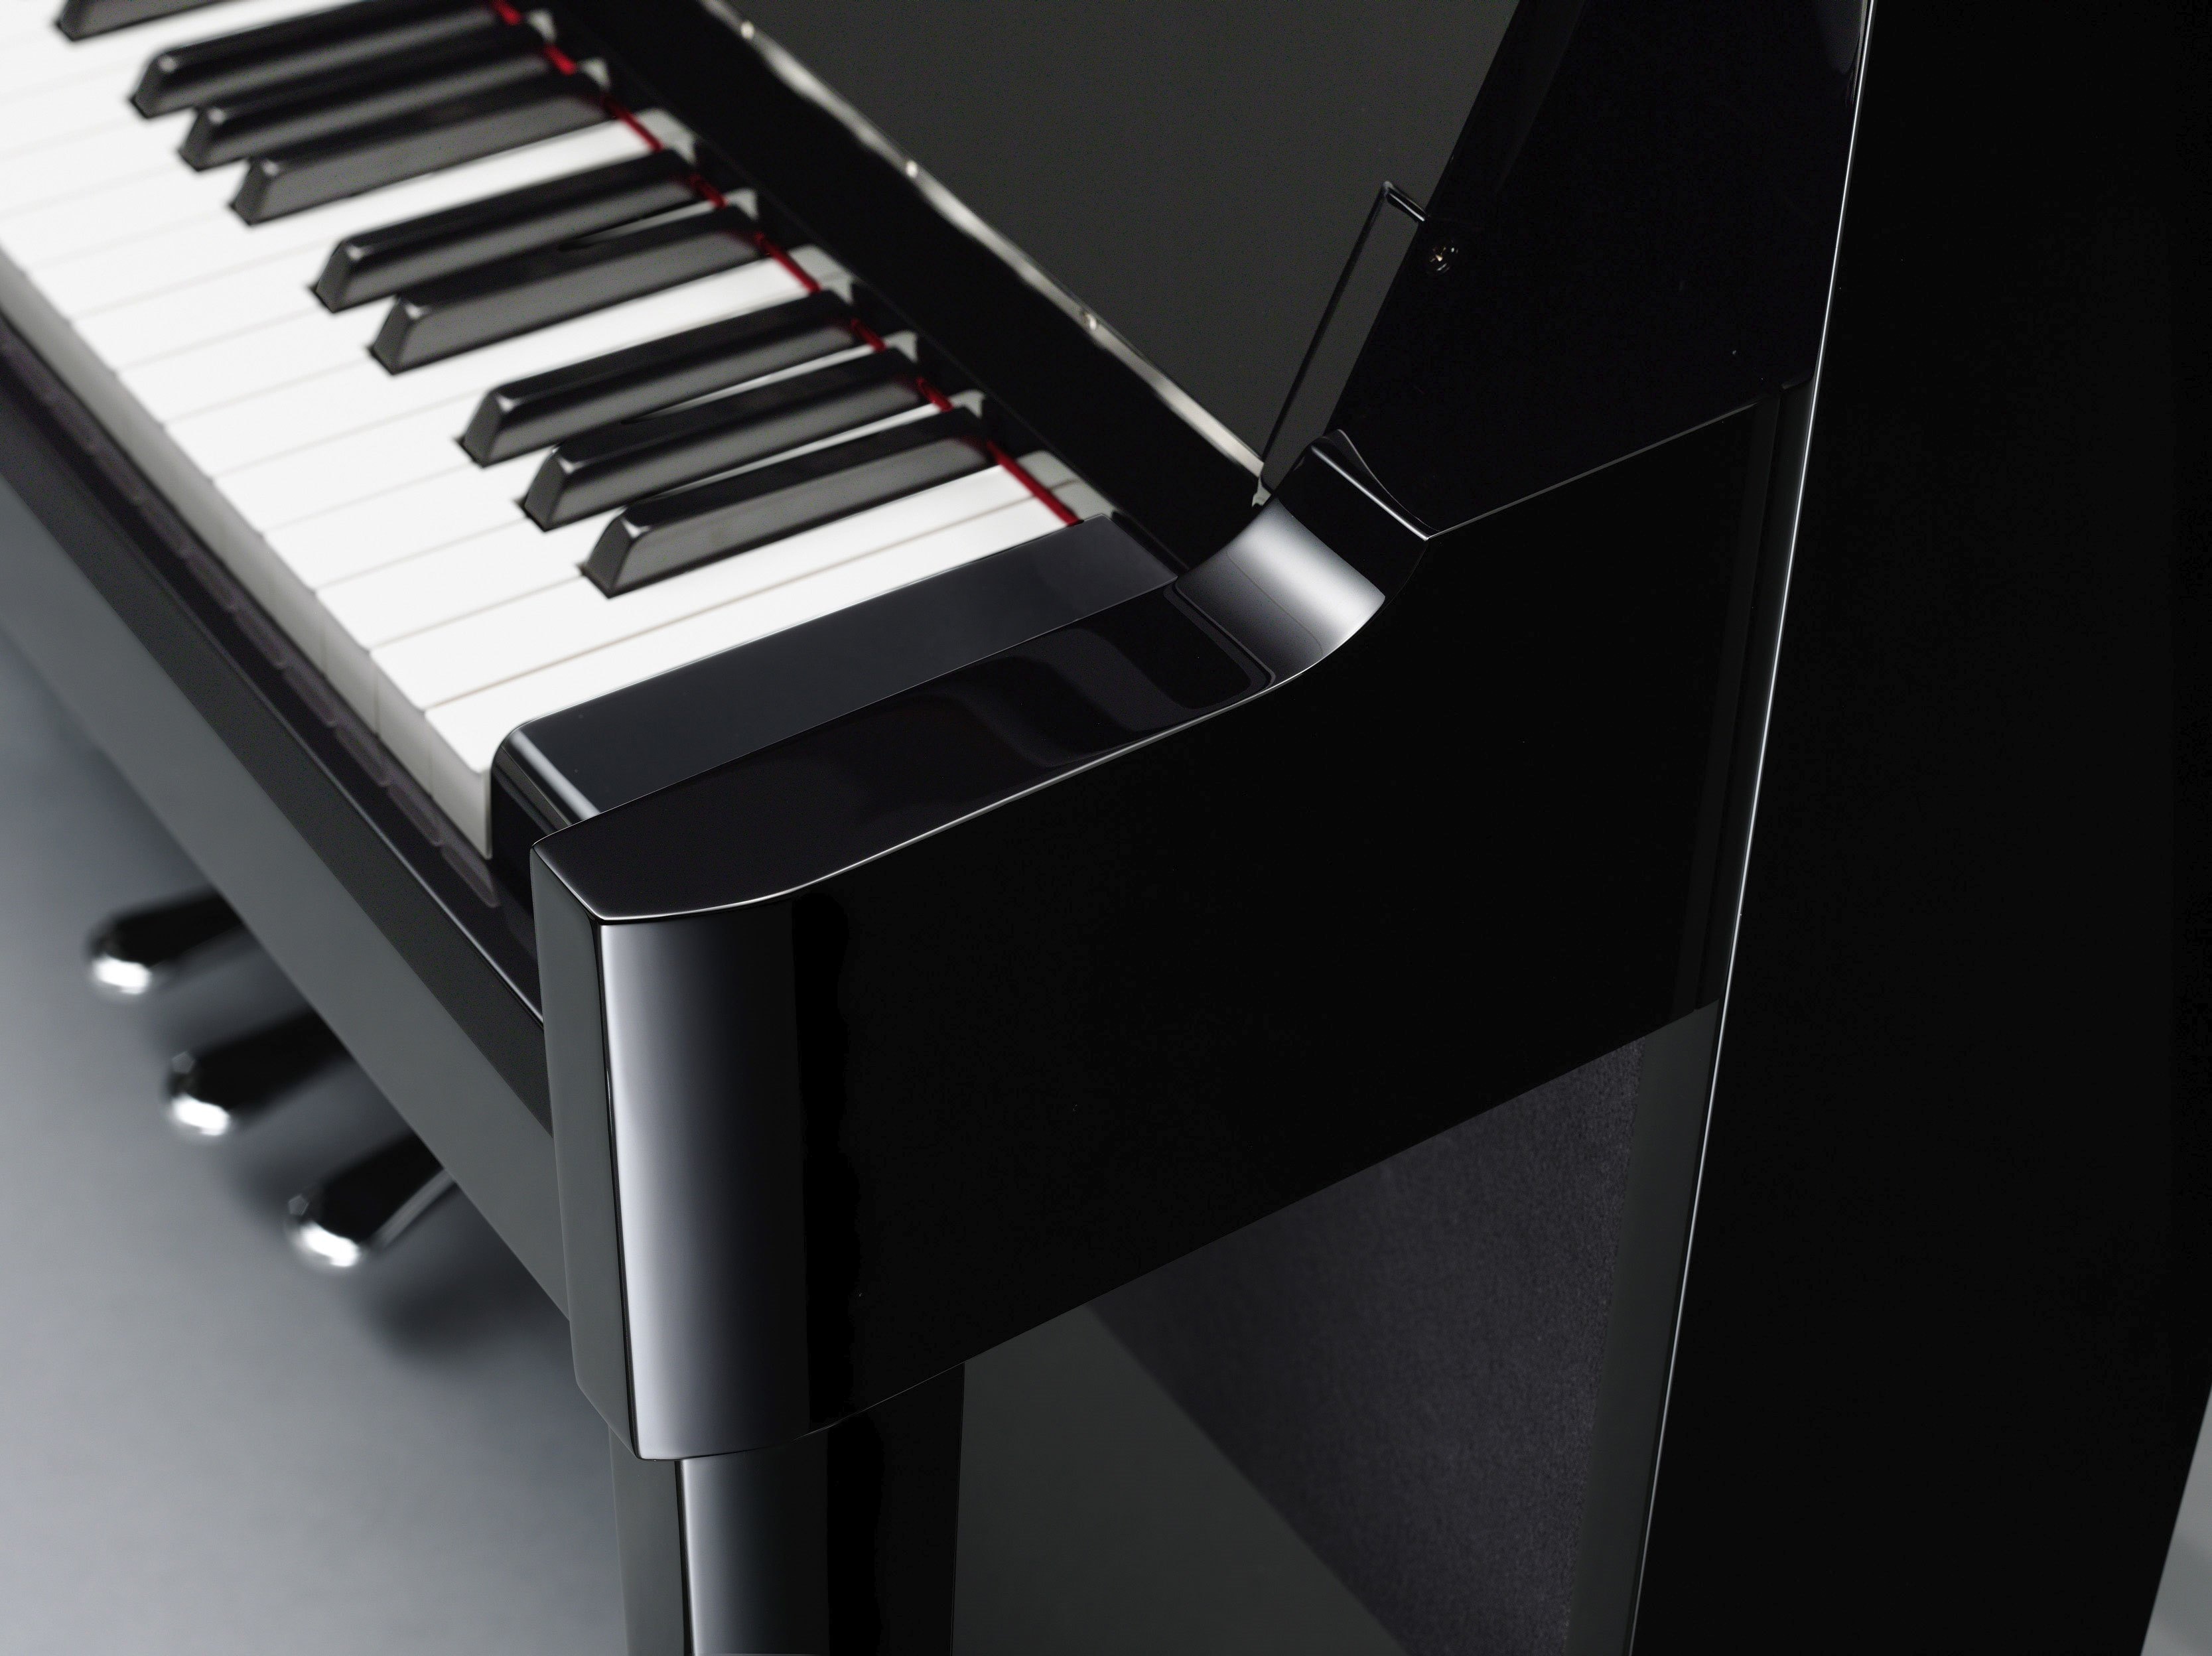 NU1 - Overview - NU1 - Pianos - Musical Instruments - Products 